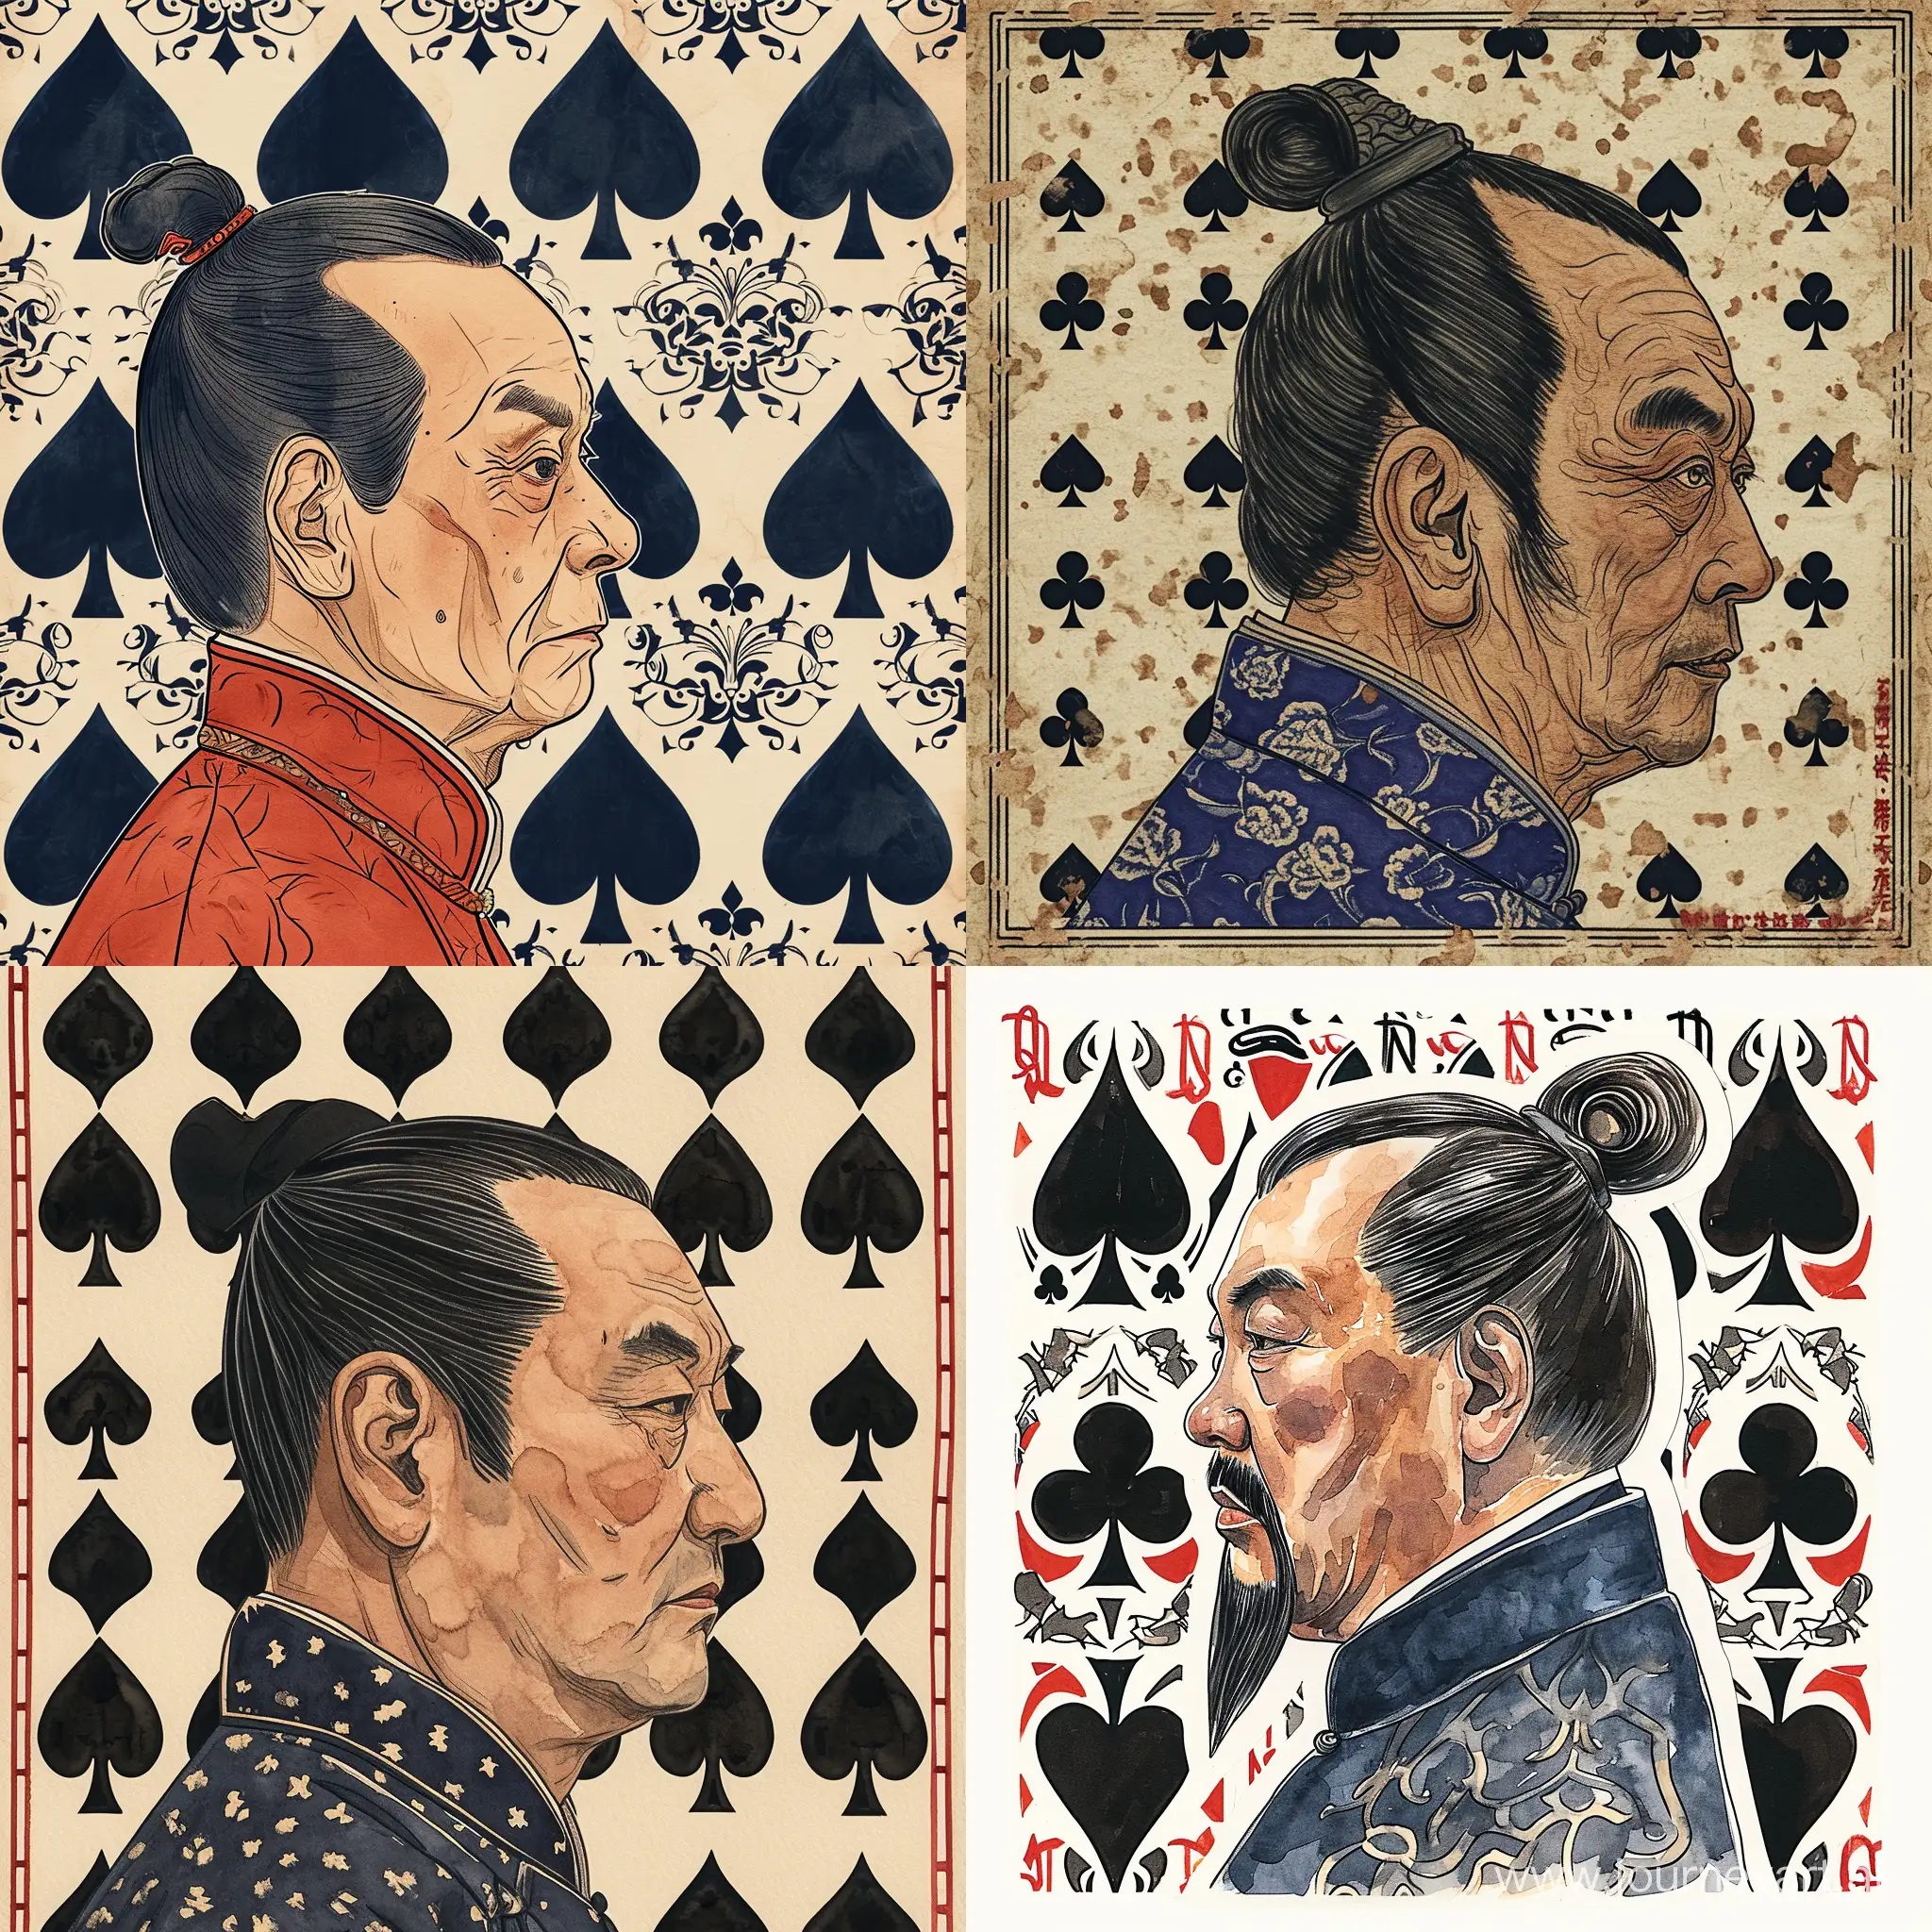 Profile of Emperor Qin Shihuangdi of Ancient China, portrait in profile, on the background of the suit of spades pattern, caricatured, Victor Ngai style, watercolor, ink, black outline, flat drawing